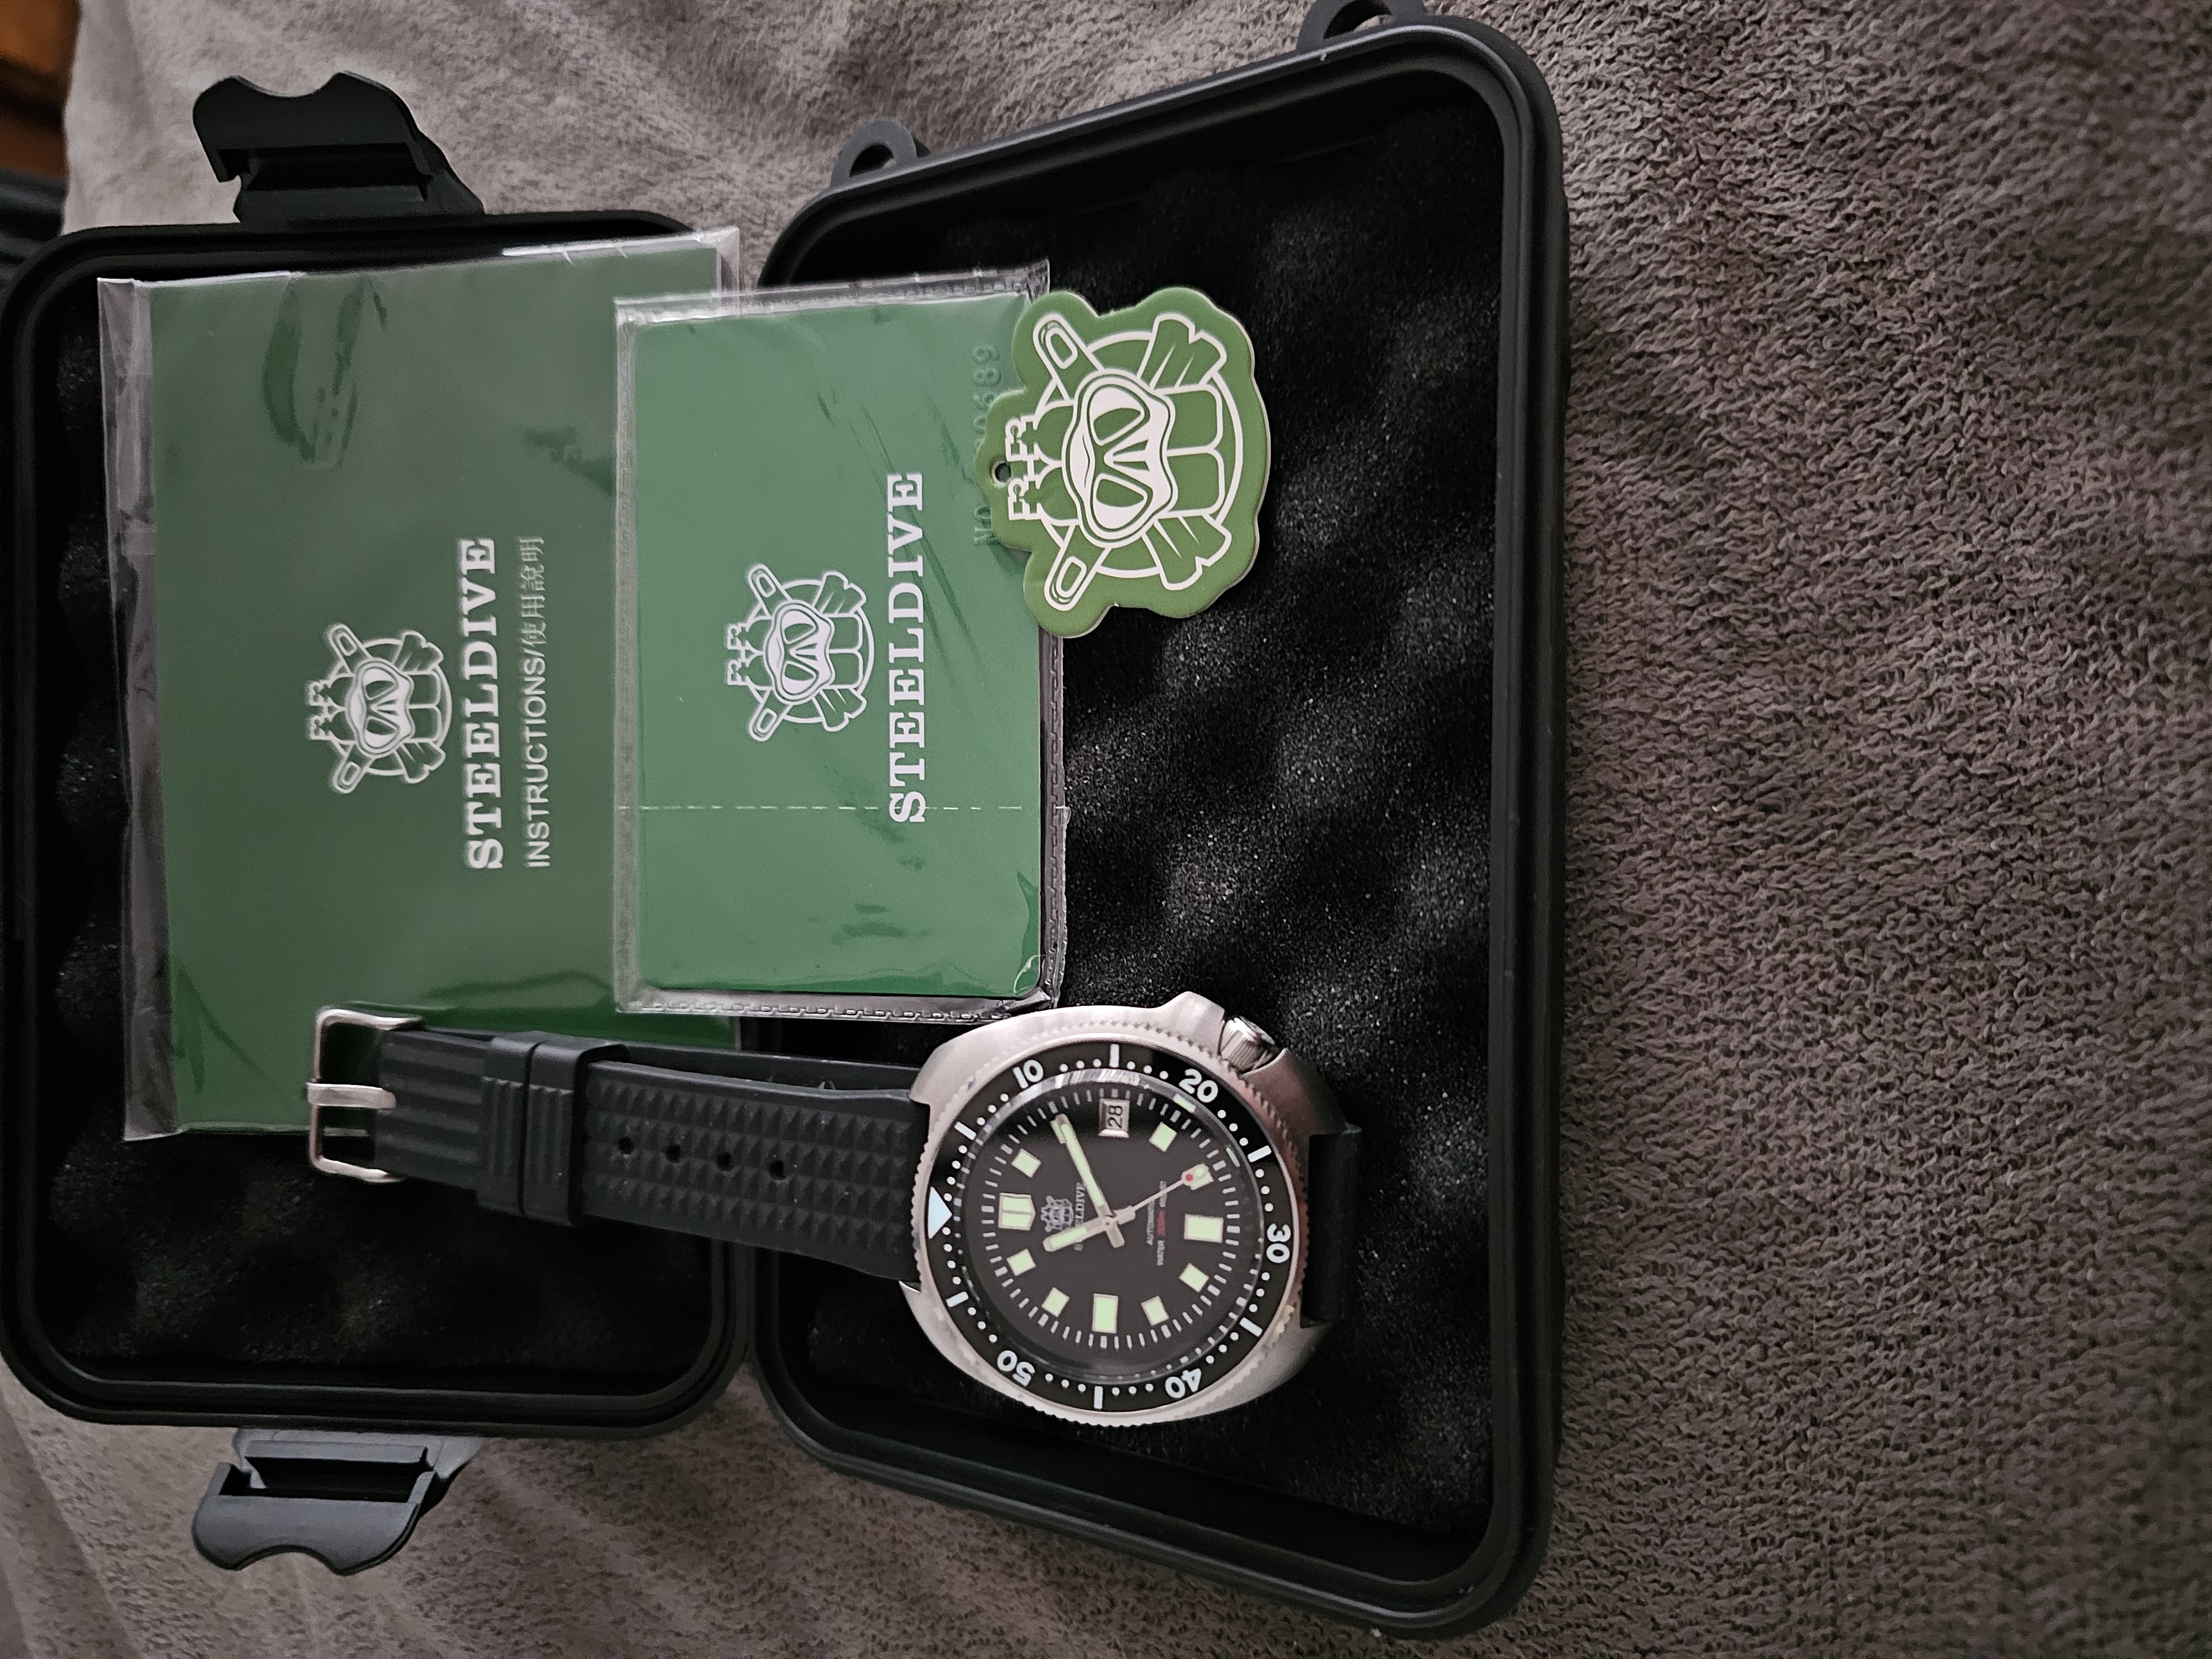 6105 Turtle Automatic Watch On Sale | Steeldive 200m Diver Watch 